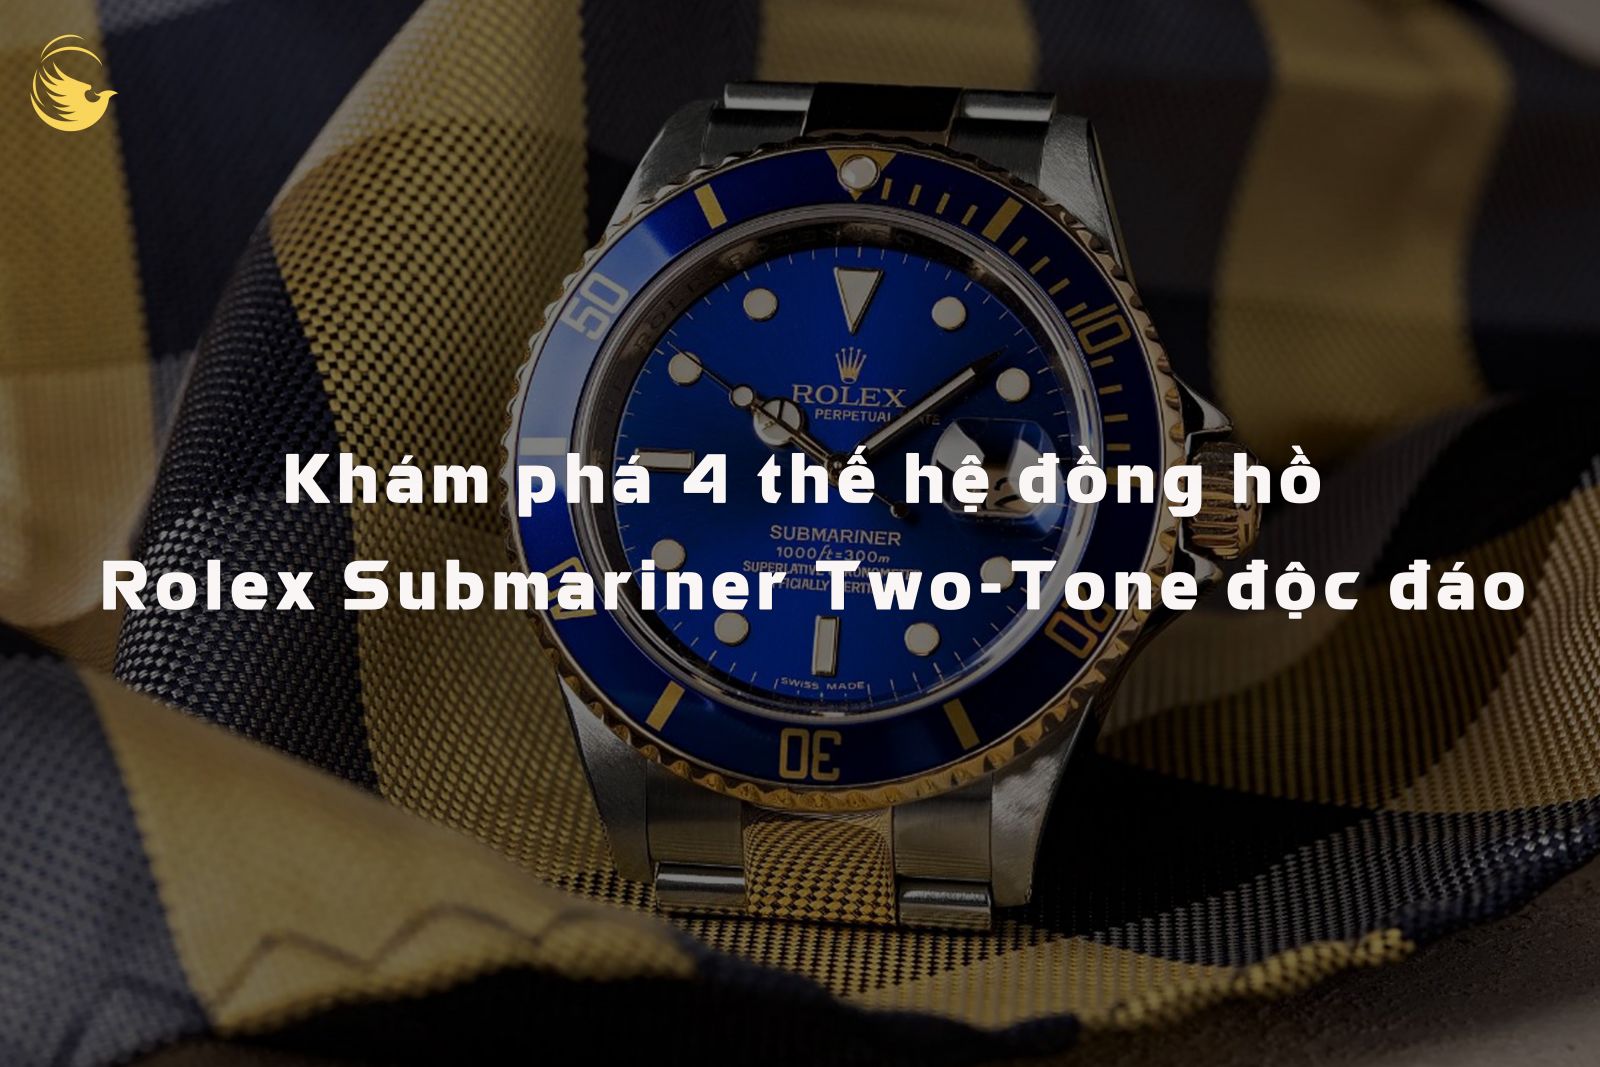 kham pha 4 the he dong ho rolex submariner two tone doc dao